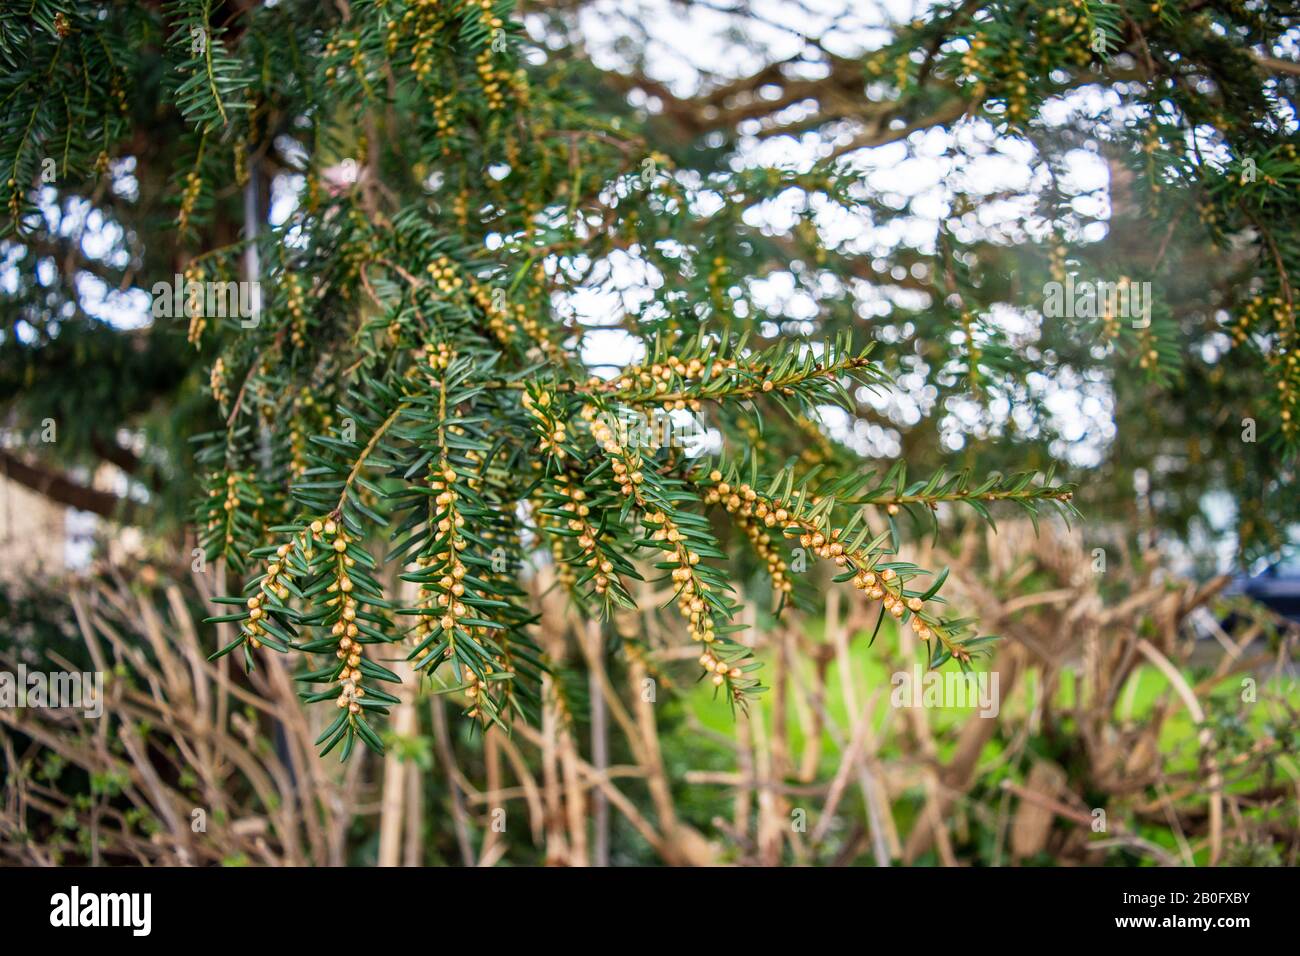 Small yellow brown globe like structures down a yew tree Taxus baccata branch that are the trees blossom in early February Stock Photo